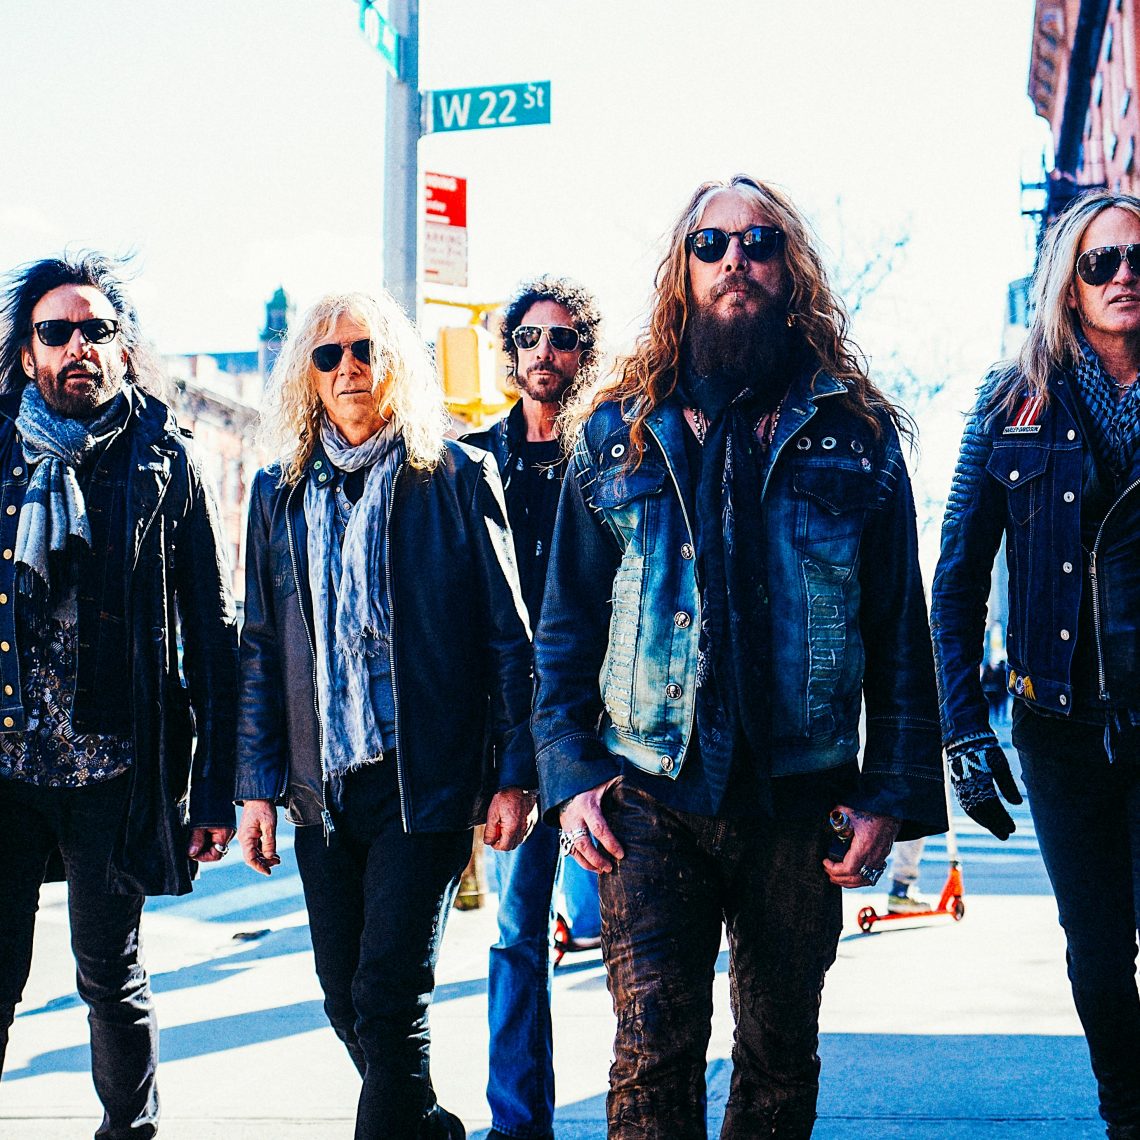 THE DEAD DAISIES KICK OFF “WELCOME TO DAISYLAND” TOUR IN LIVERPOOL ON NOVEMBER 13TH!